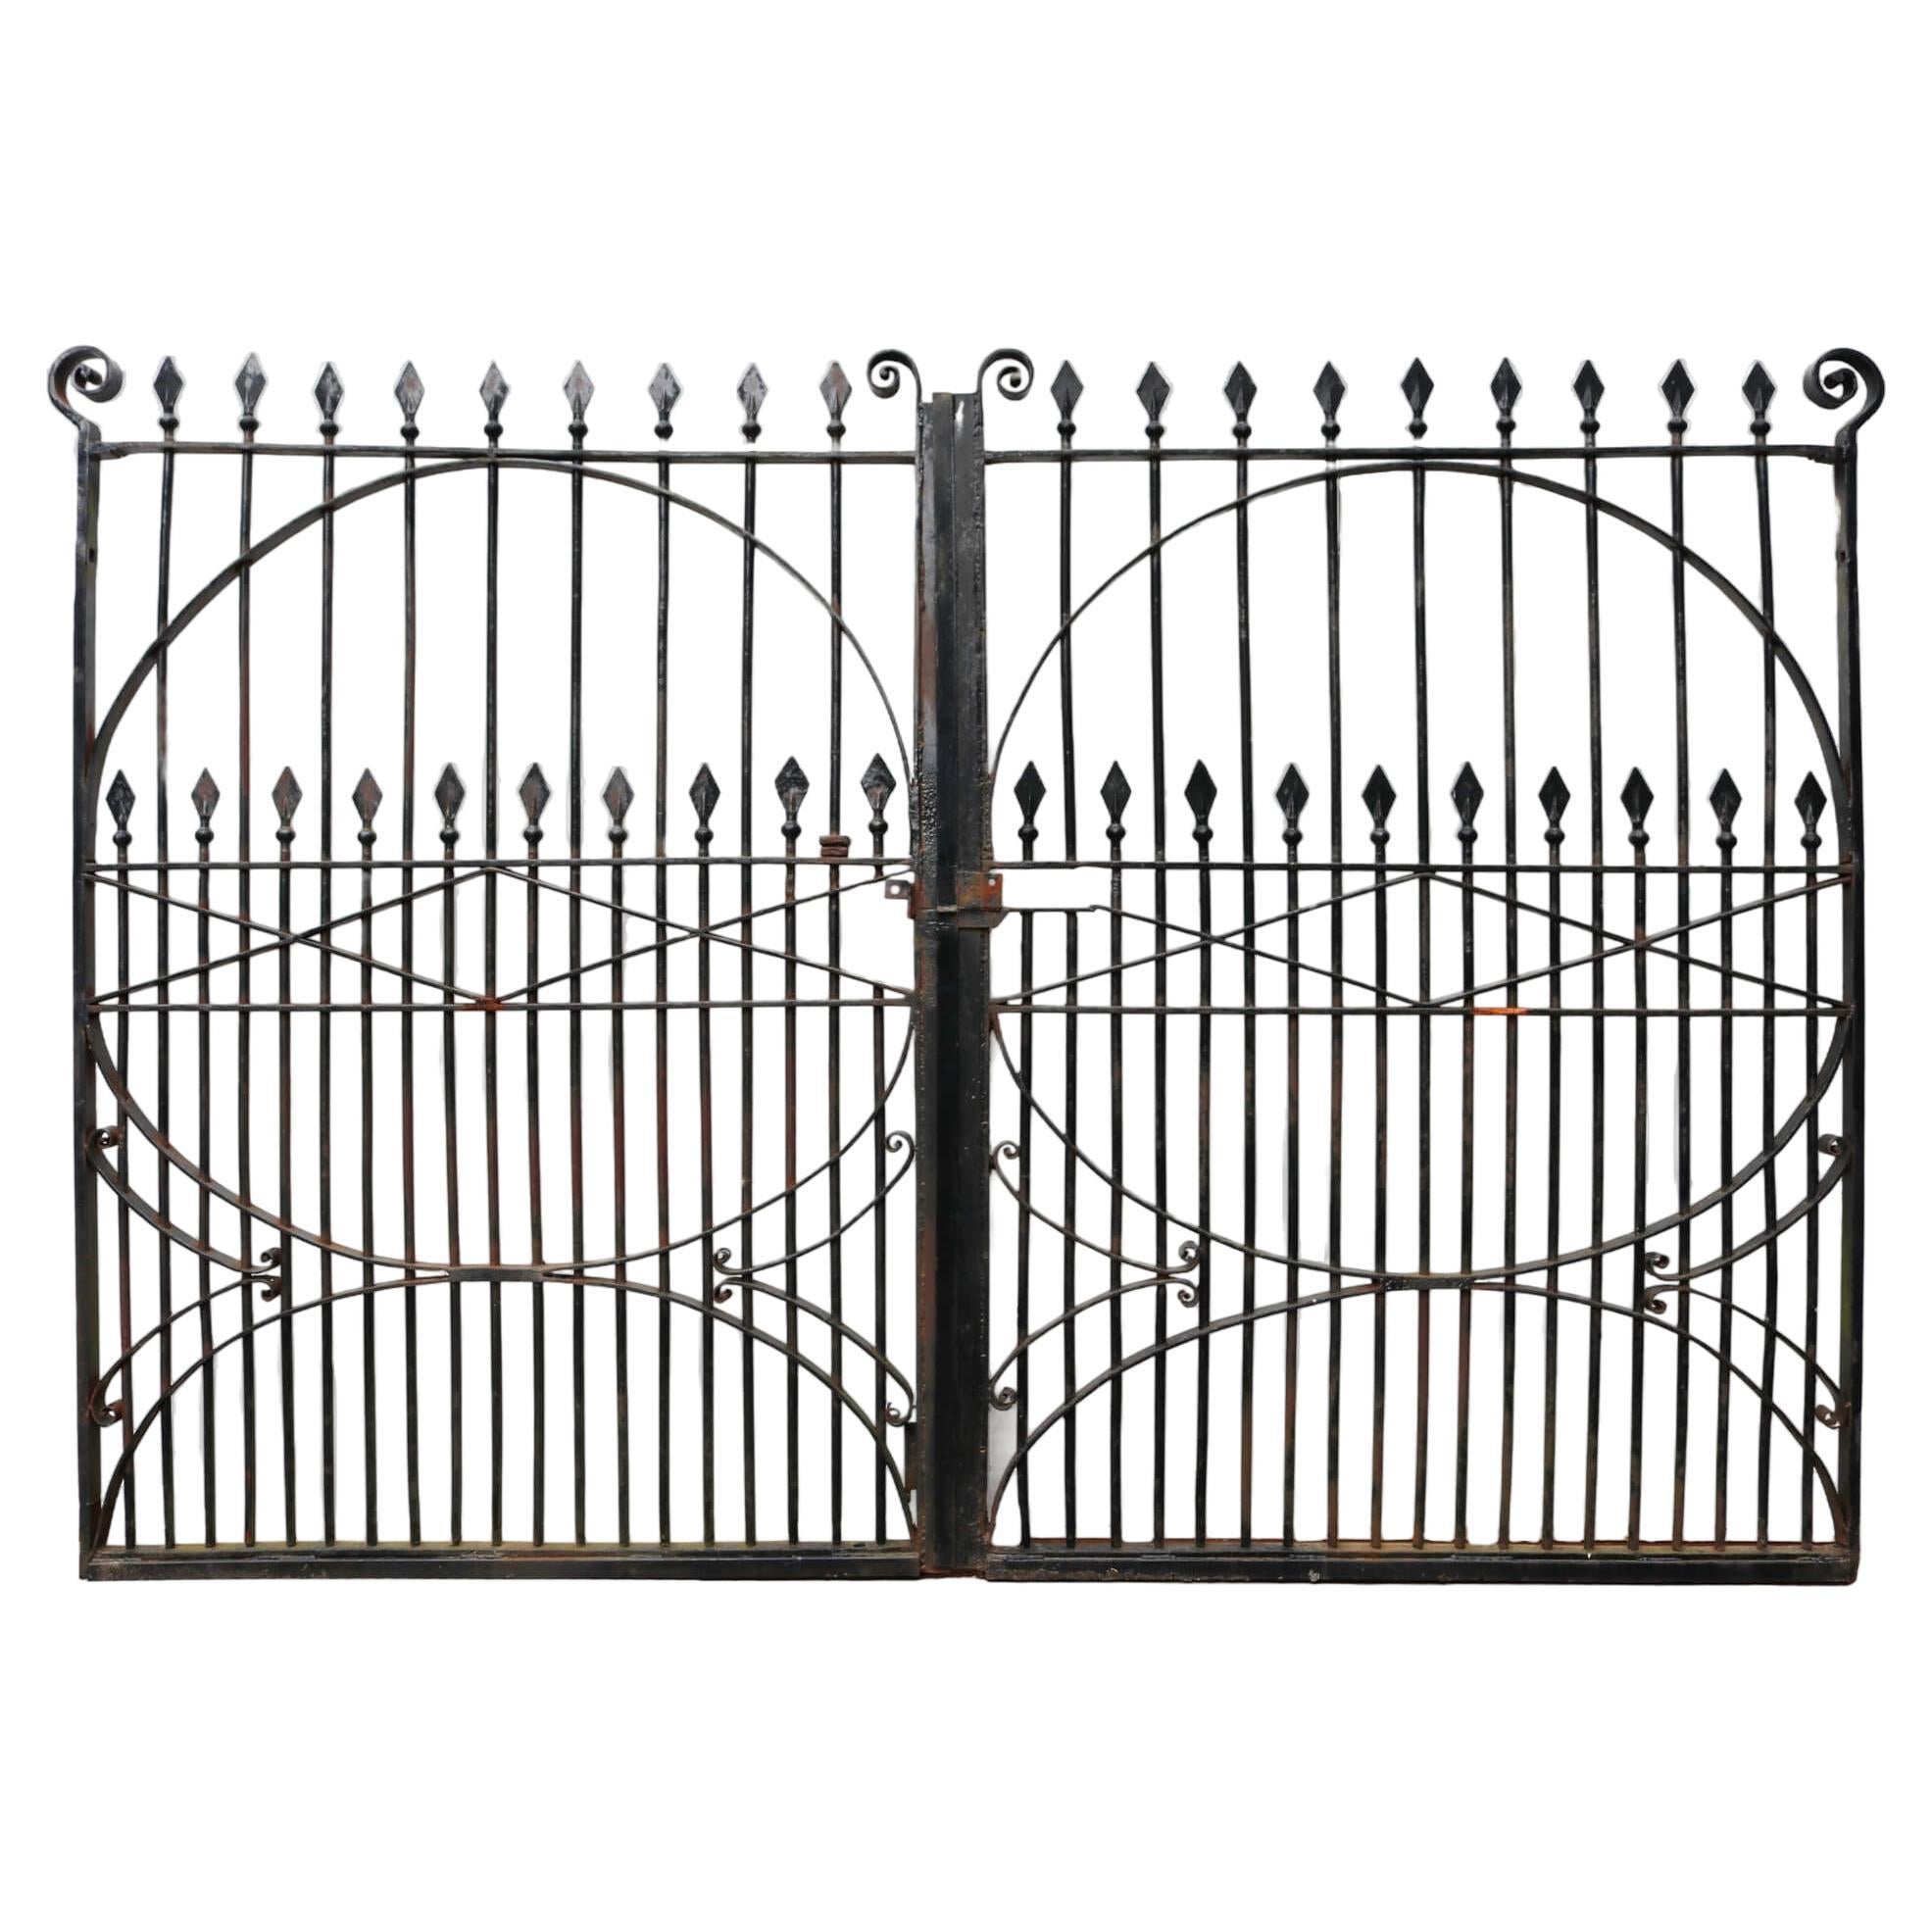 Set of Georgian Style Wrought Iron Driveway Gates 270 cm (8’8”) For Sale